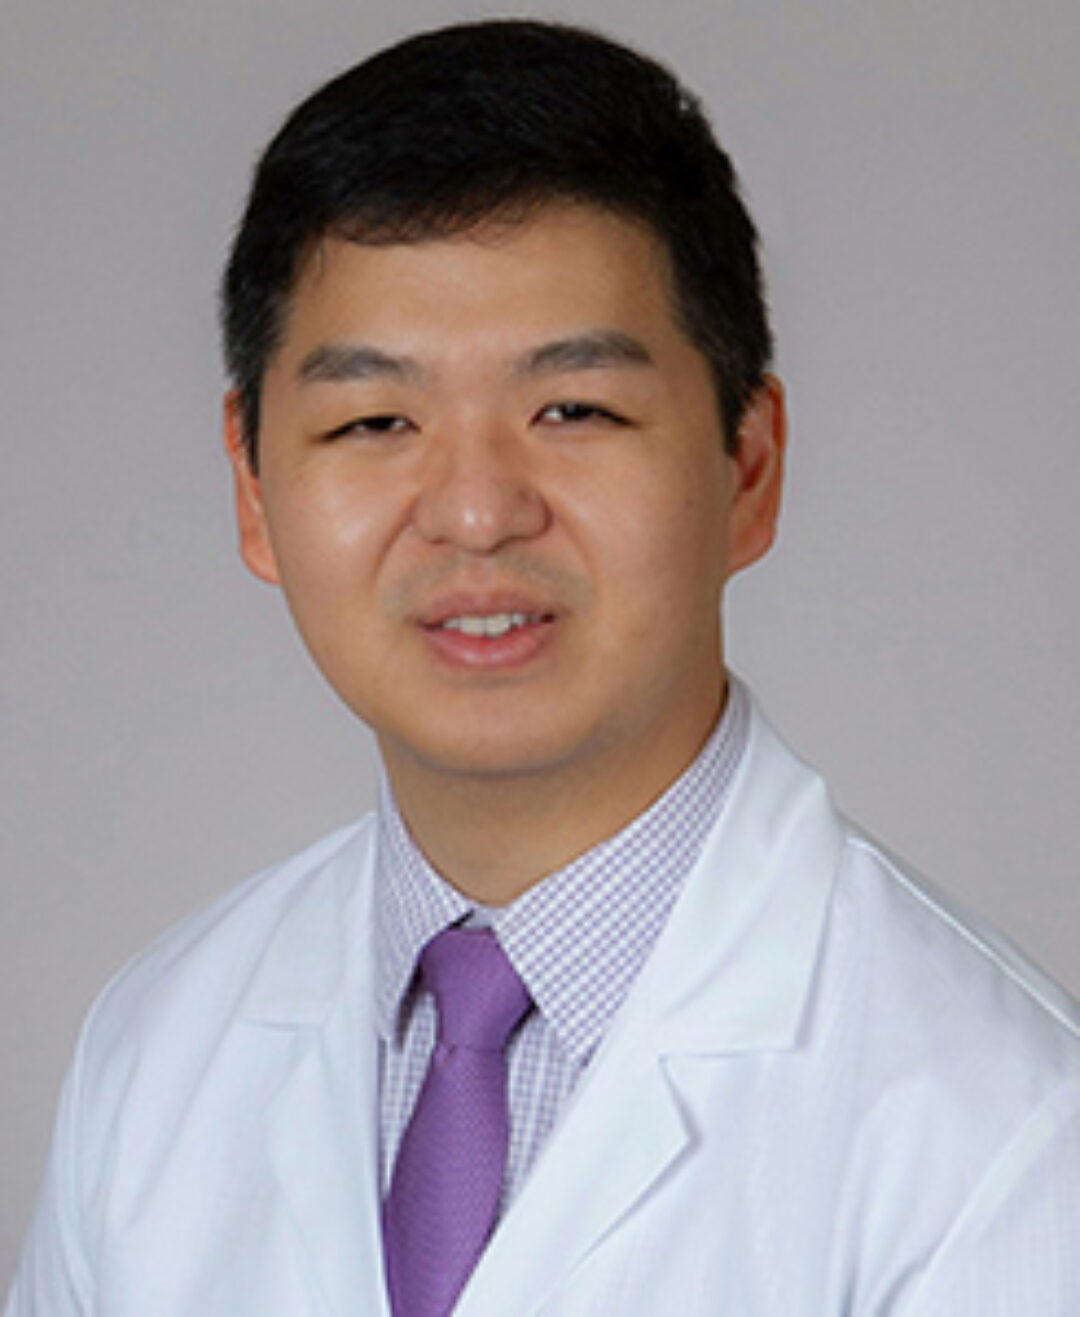 Brian Song, MD, MPH